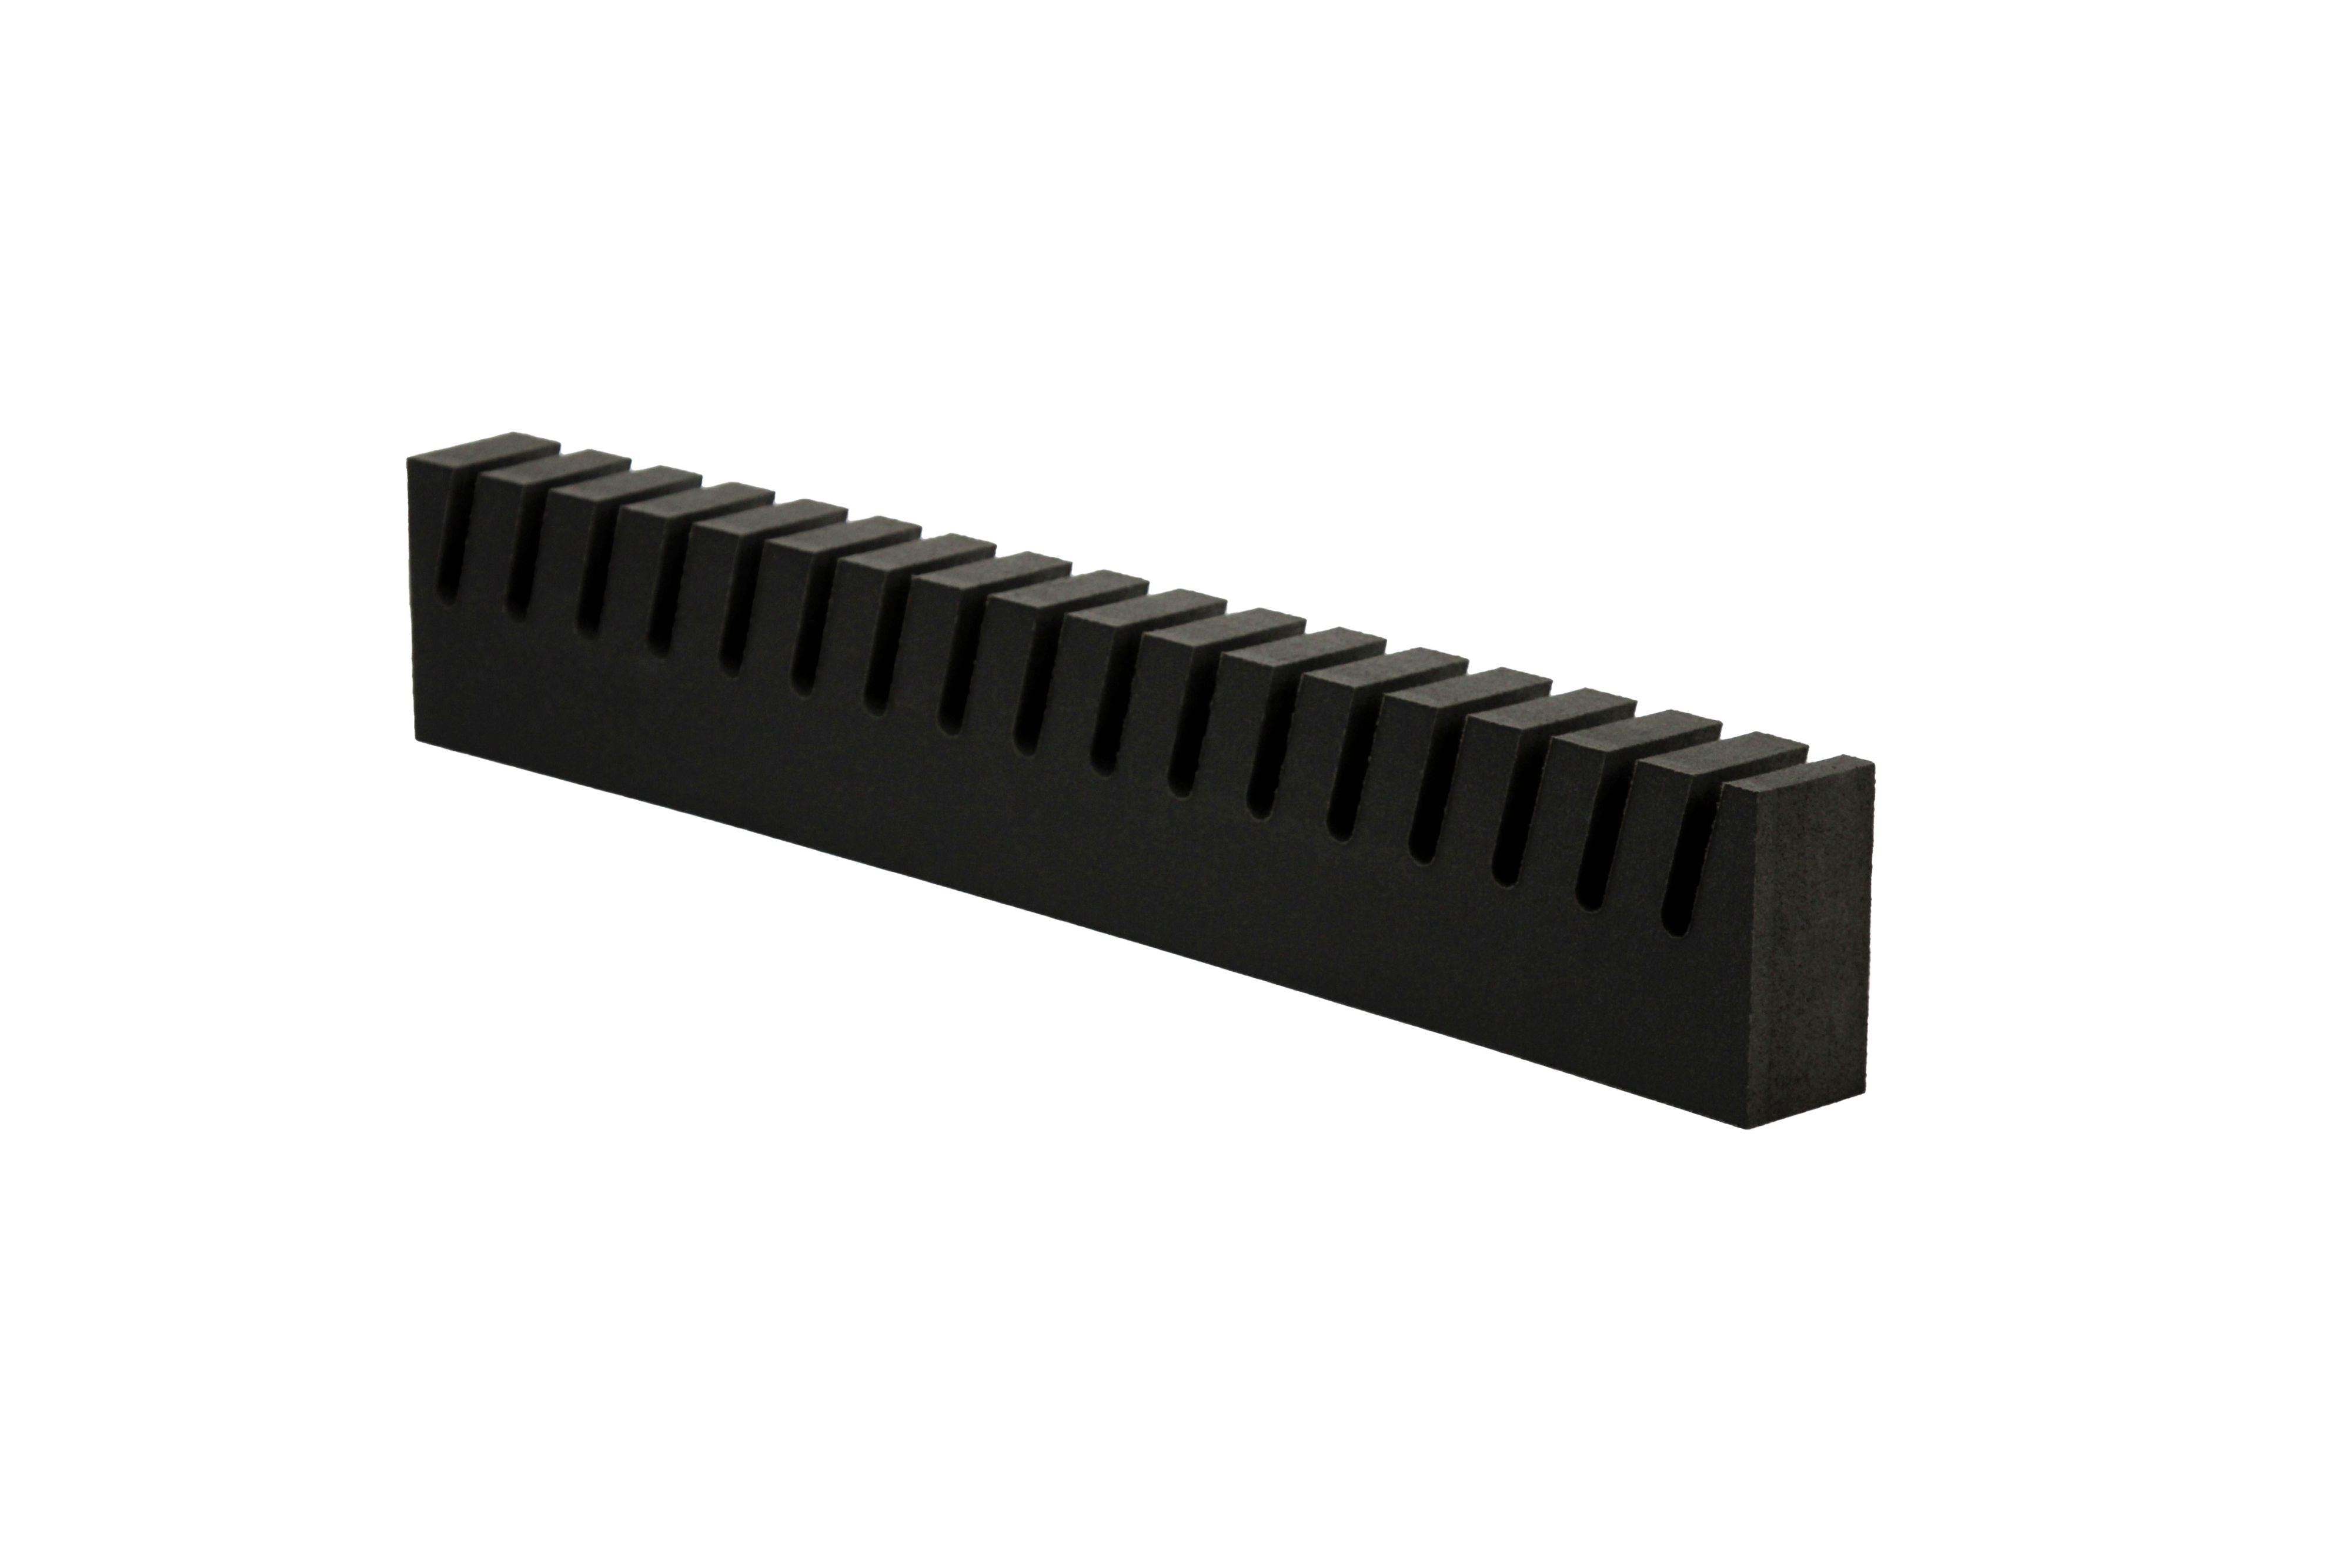 Heavy Duty Foam Dunnage Reusable Cushion for Shipping Box Crate Angled Slot 24x4x2 1 Pack